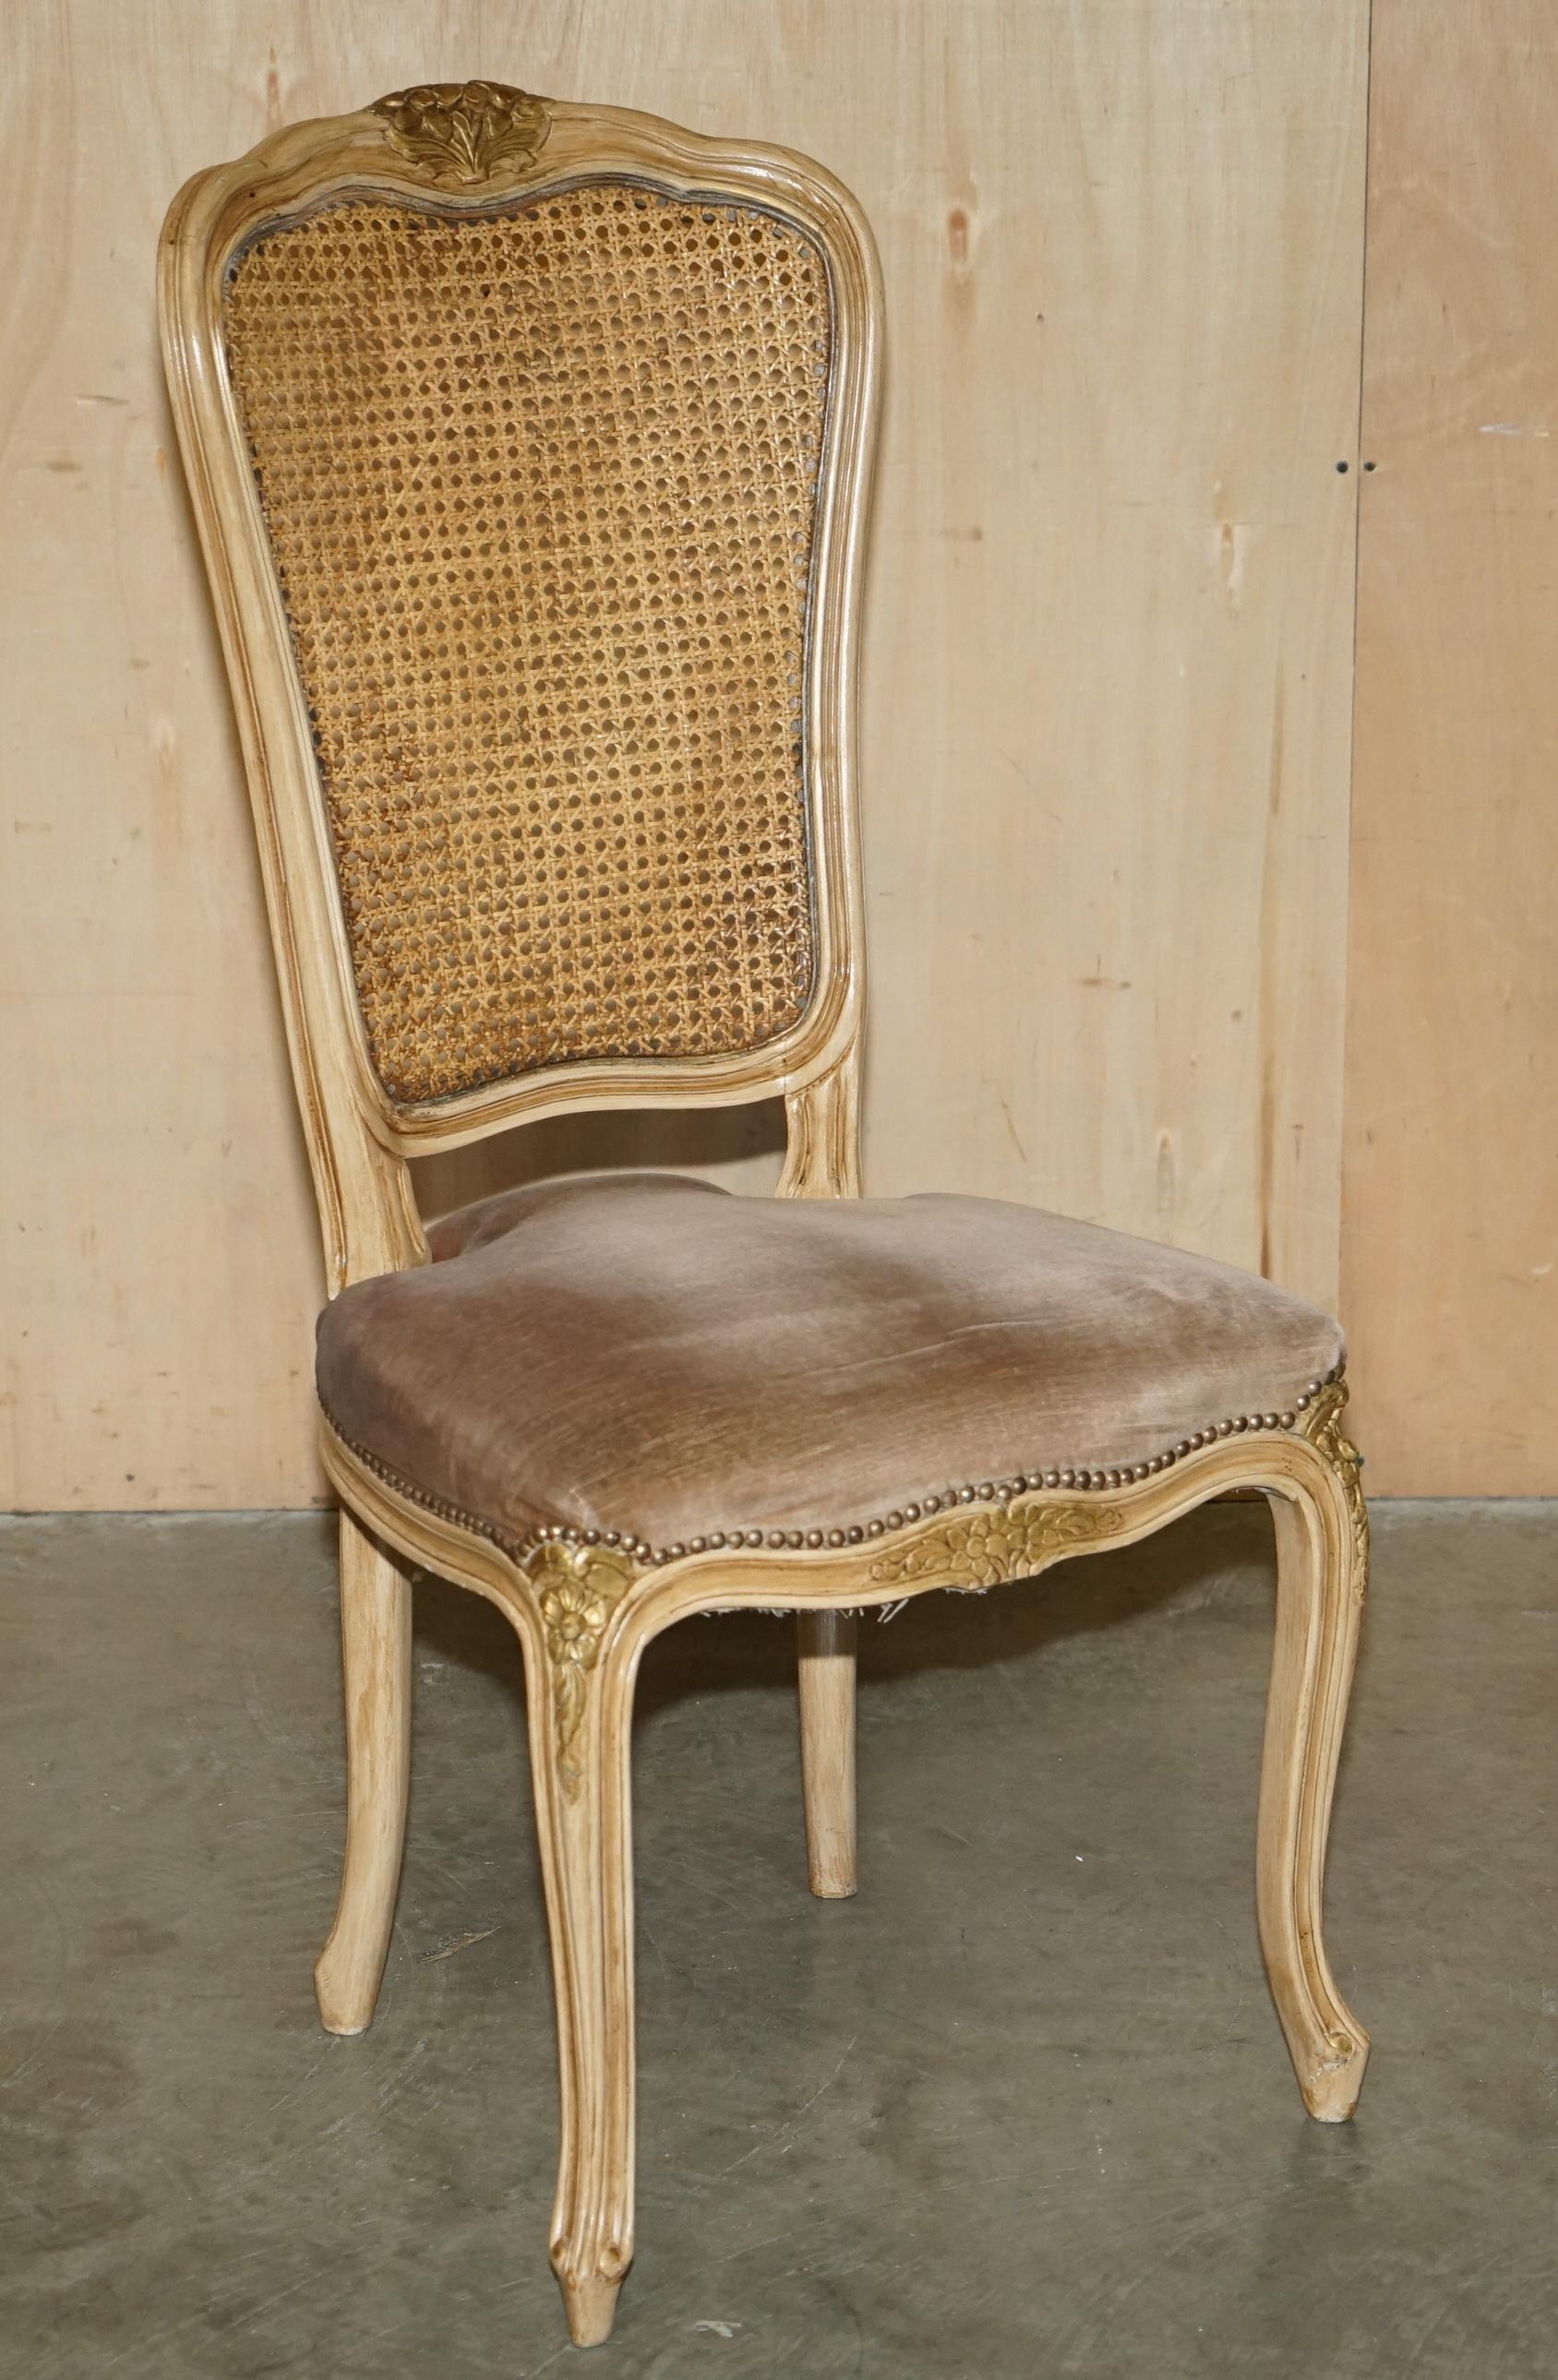 FOUR FINE ANTIQUE FRENCH BERGERE DiNING CHAIRS WITH PERIOD VELOUR UPHOLSTERY For Sale 8